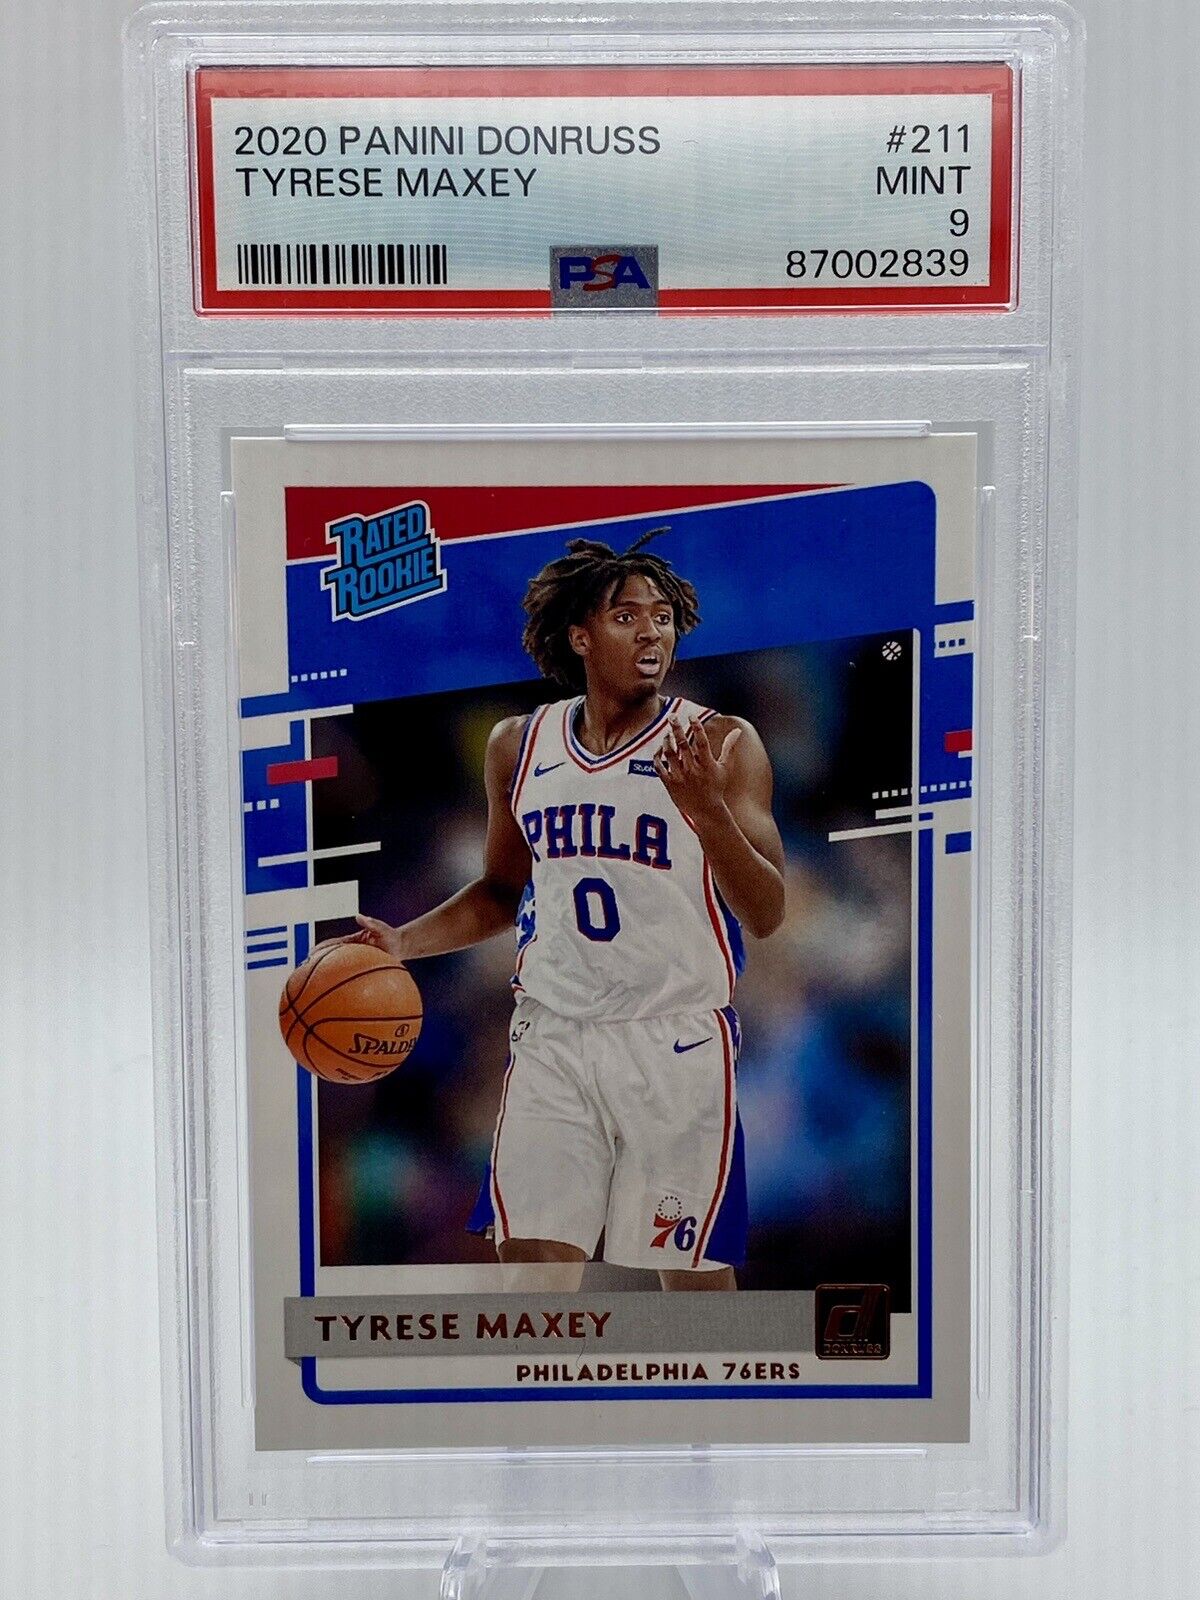 TYRESE MAXEY PSA 9 2020 PANINI DONRUSS #211 RATED ROOKIE CARD RC 76ERS